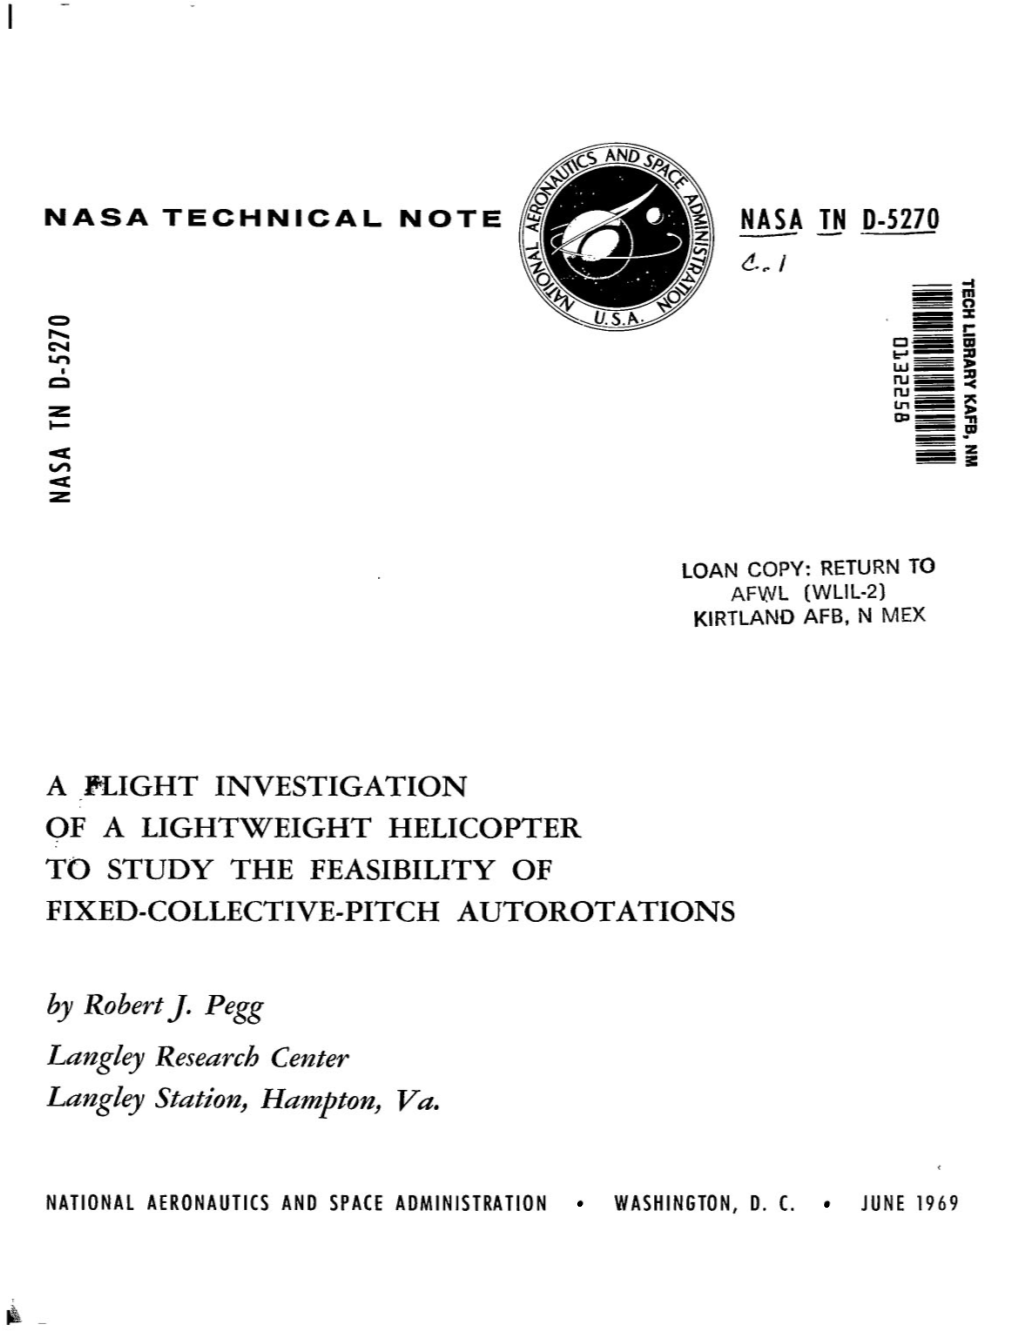 A Flight Invesitgation of a Lightweight Helicopter to Study the Feasibility Of